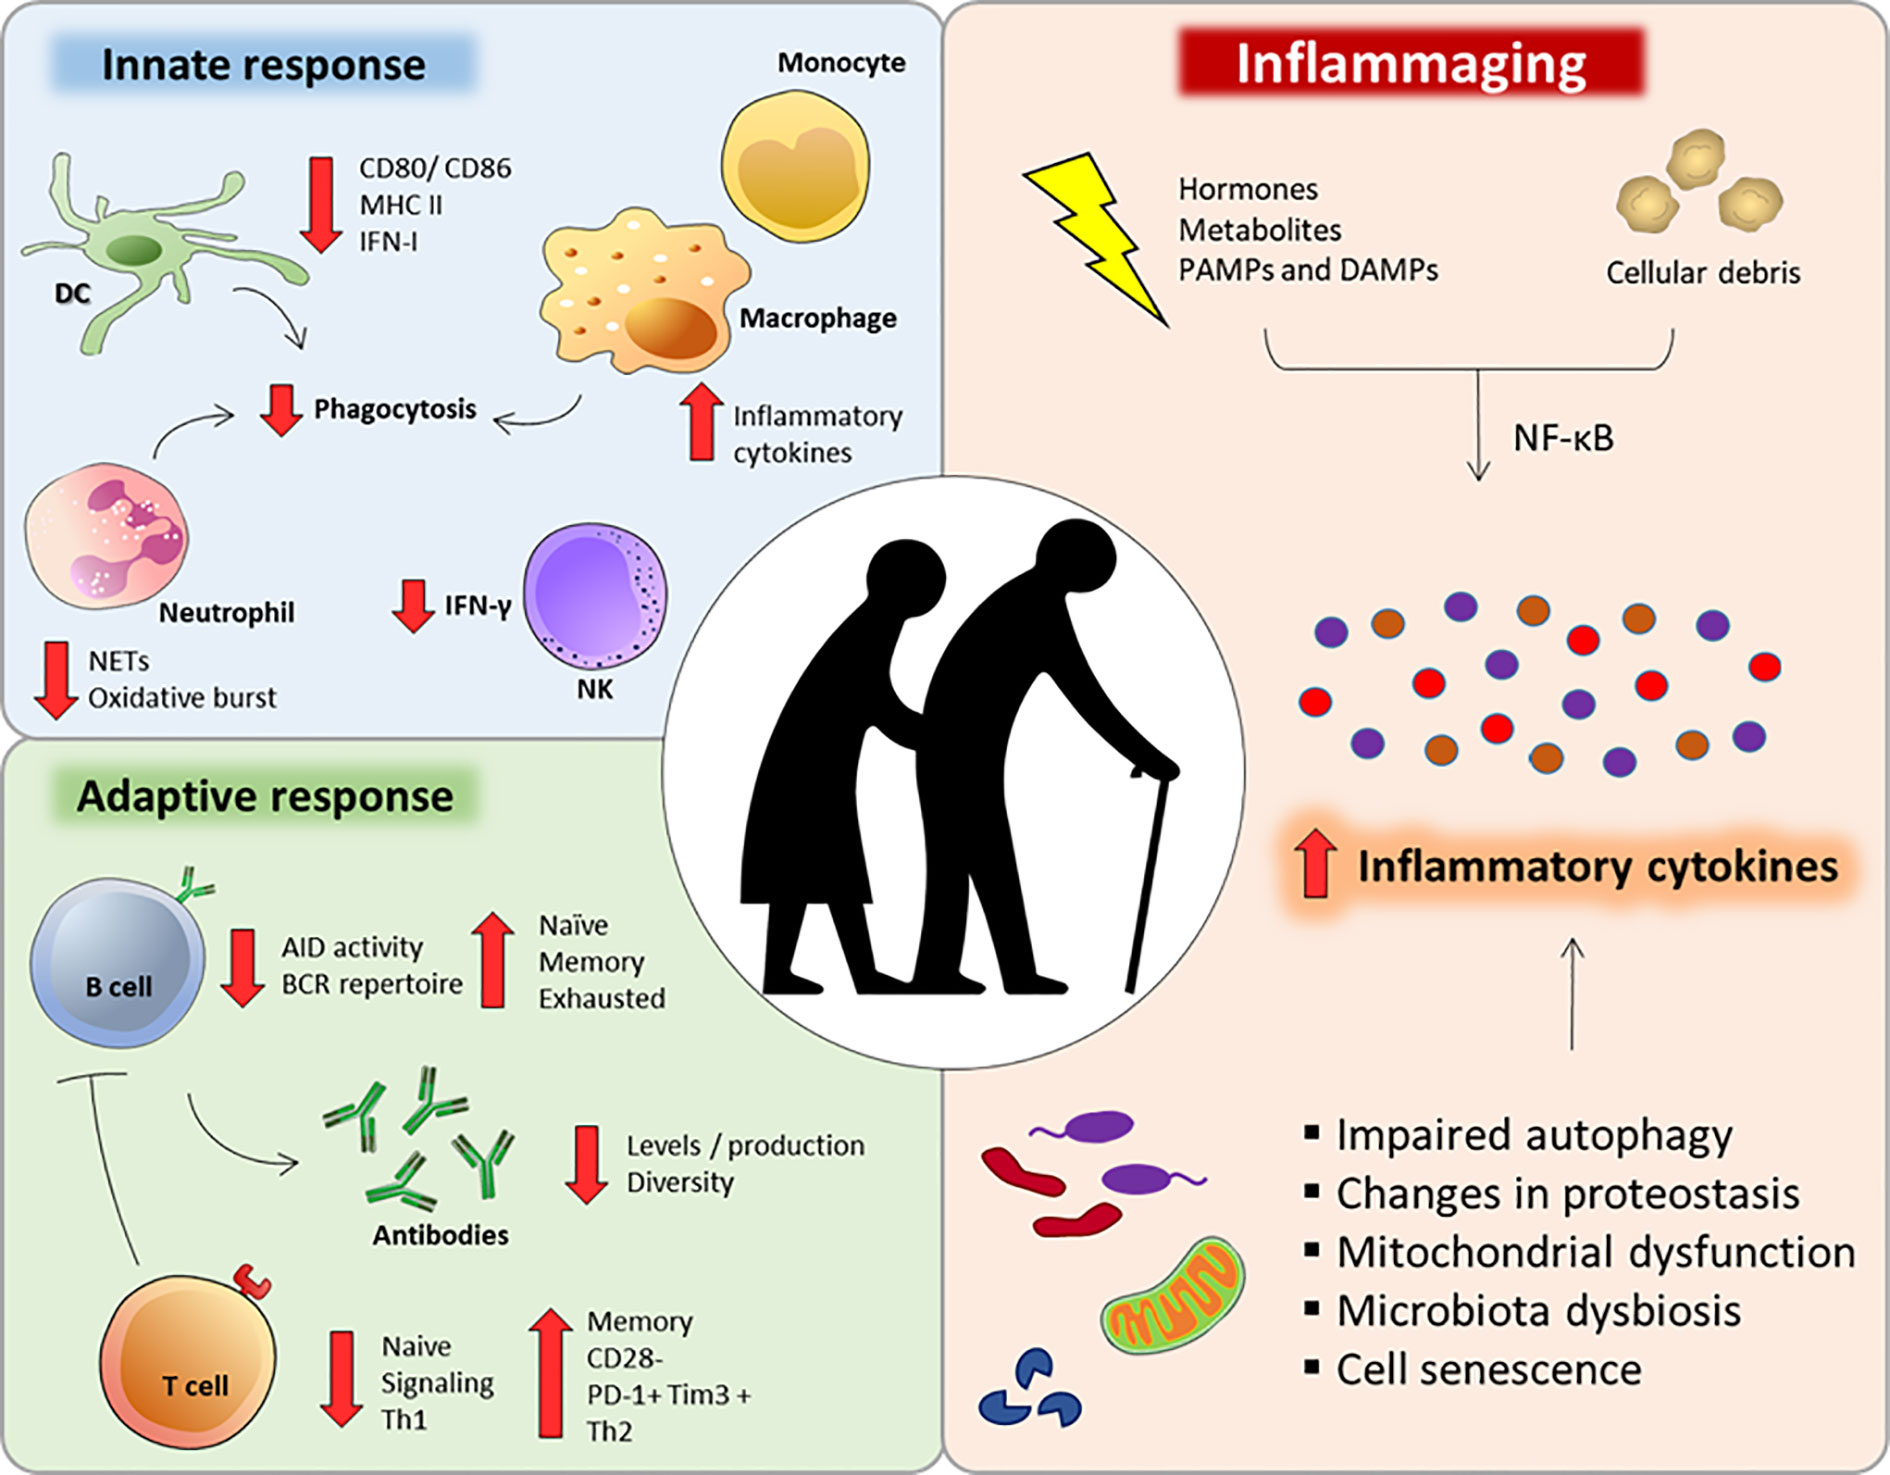 Frontiers I Mmunosenescence And Inflammaging Risk Factors Of Severe Covid 19 In Older People Immunology